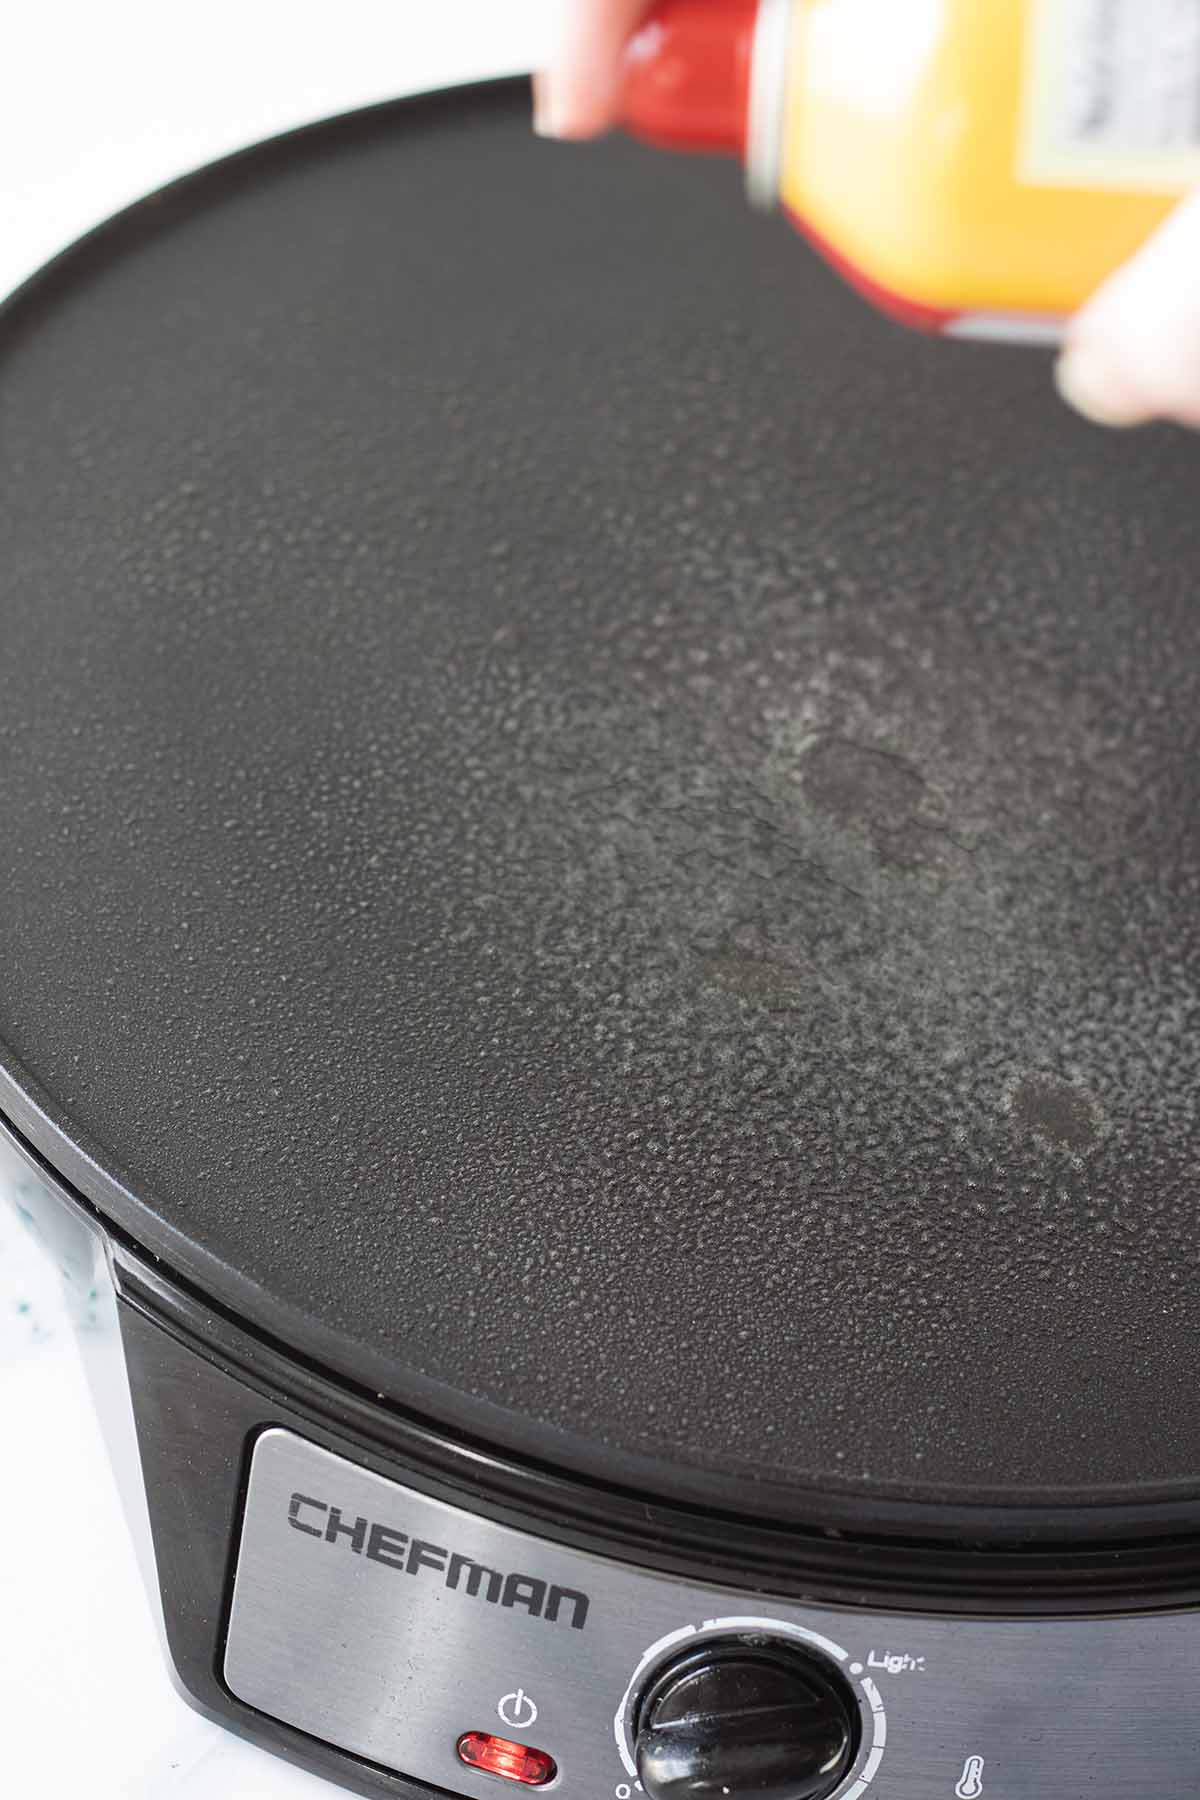 Spraying cooking spray on an electric griddle